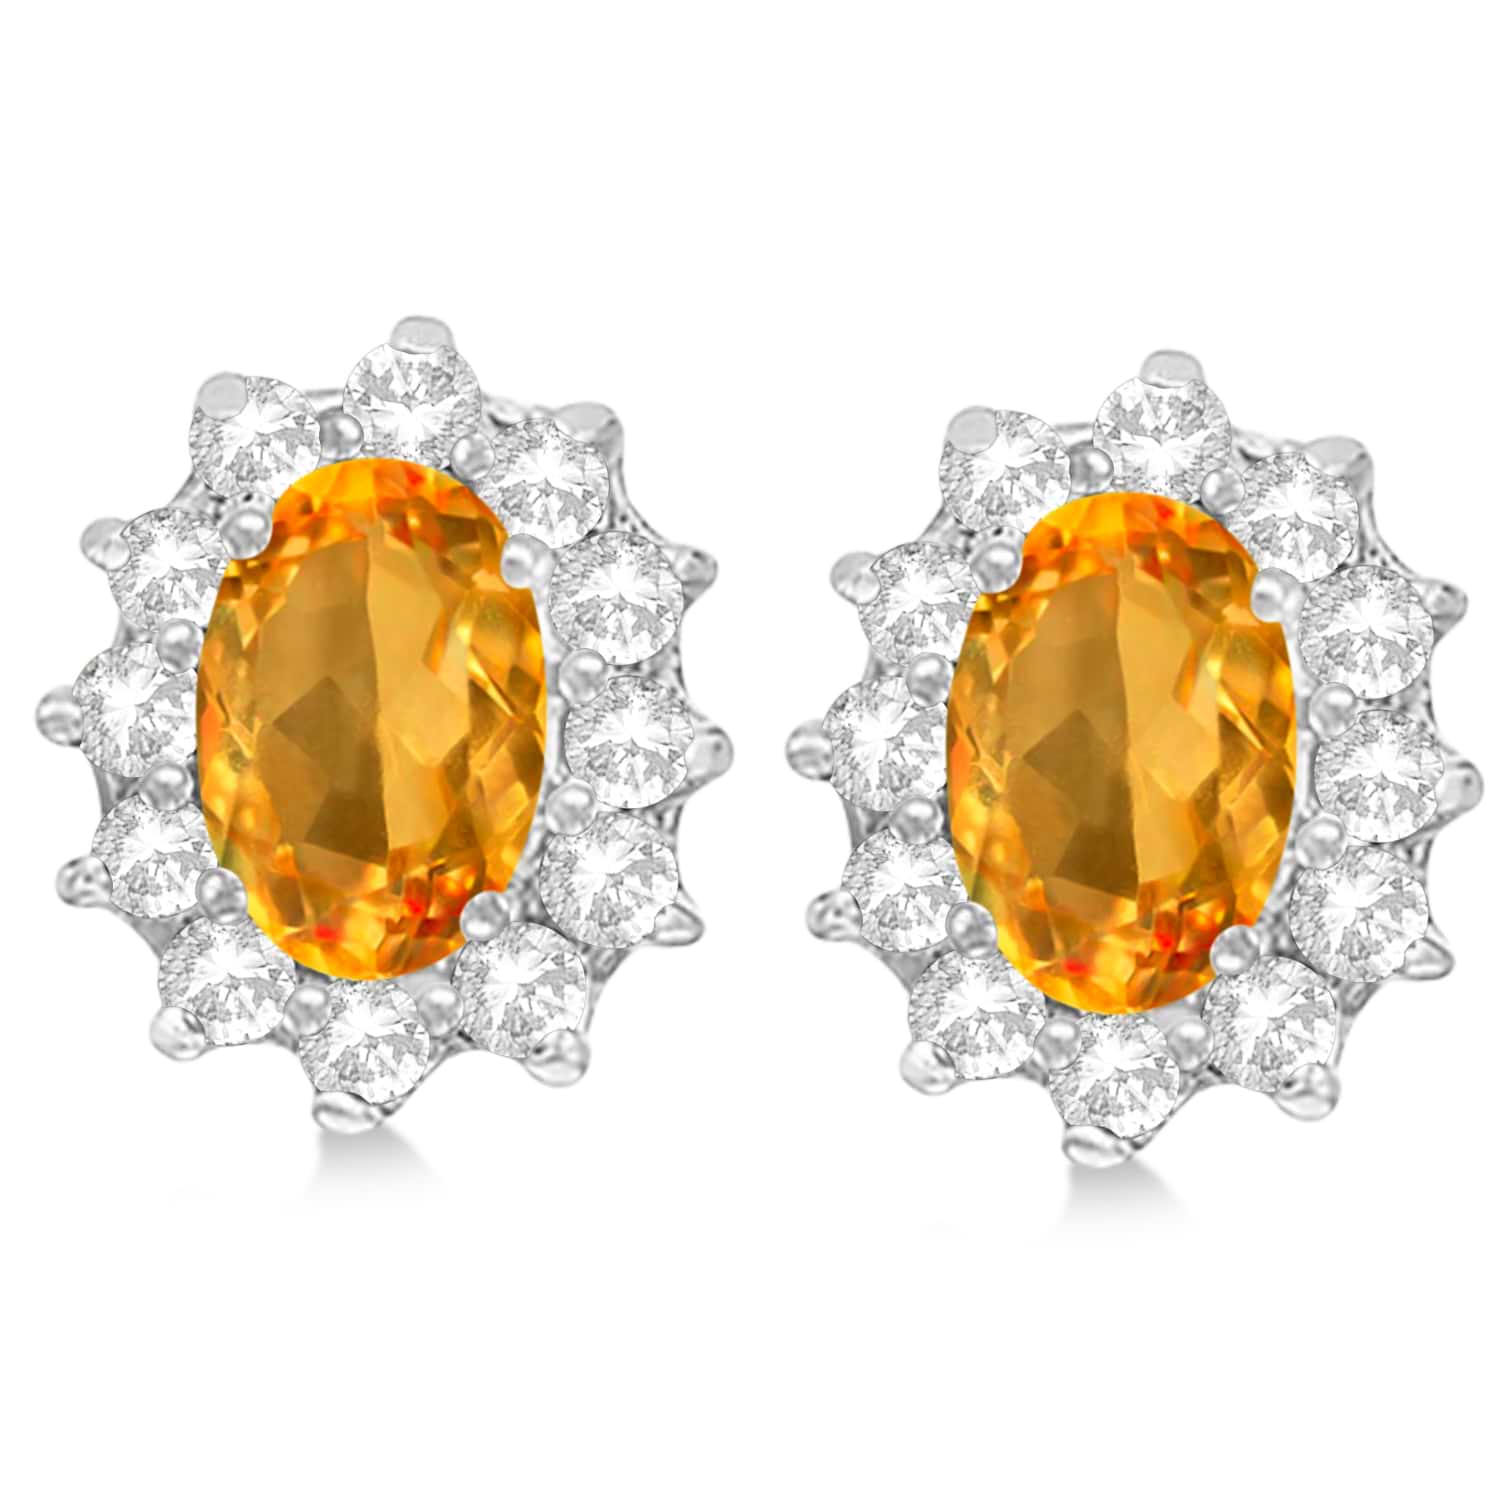 Oval Citrine & Diamond Accented Earrings 14k White Gold (2.05ct)